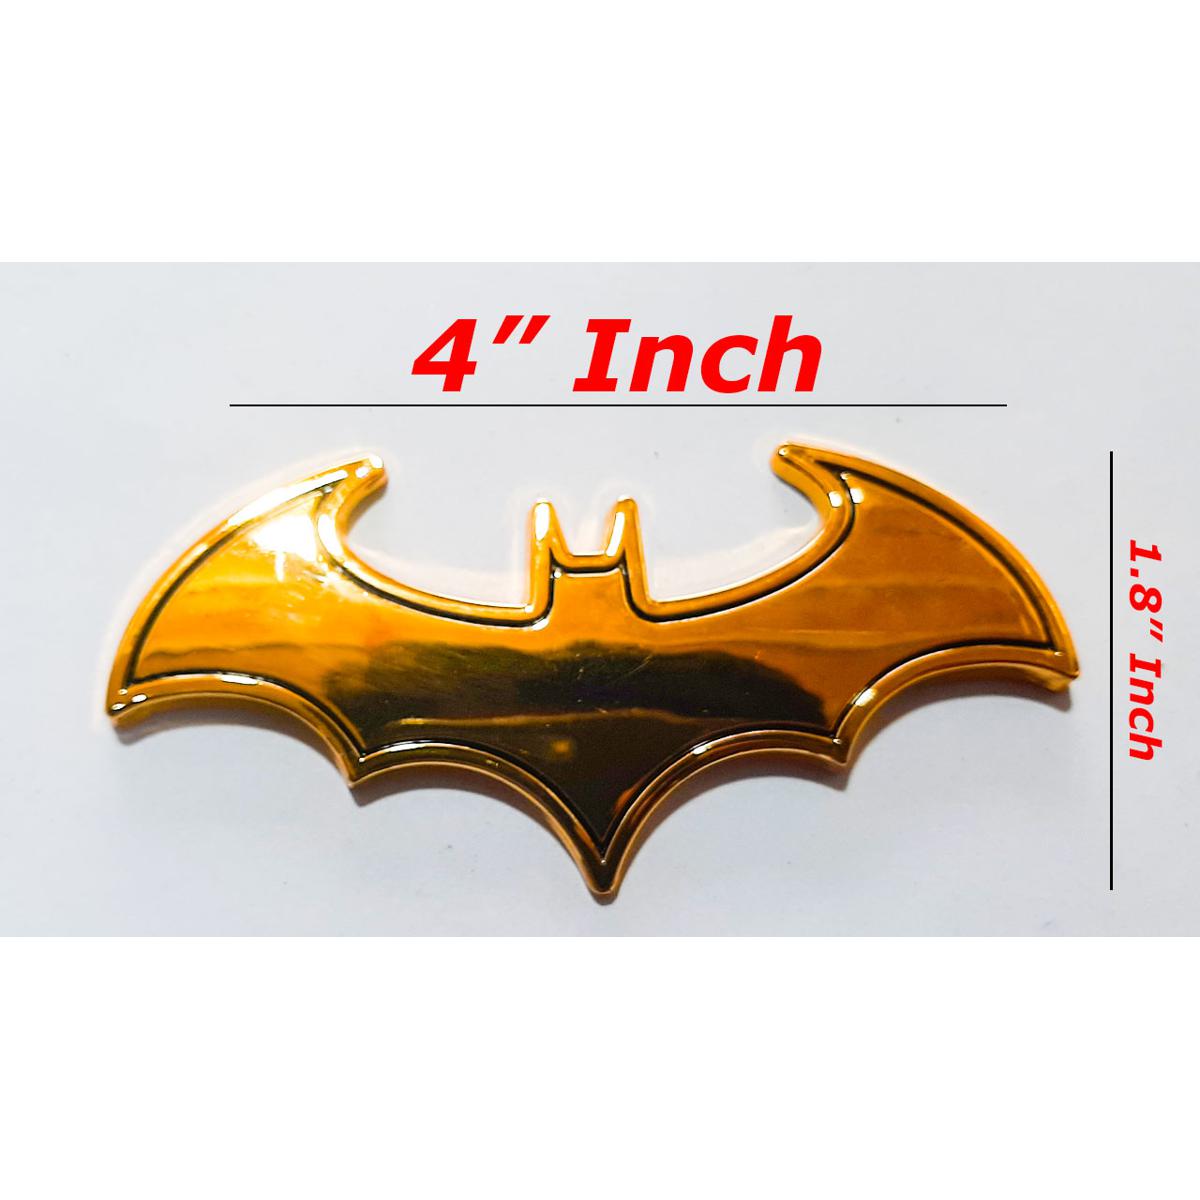 New Style Batman Logo For Motor Bike and Cars: Buy Online at Best Prices in  Pakistan 